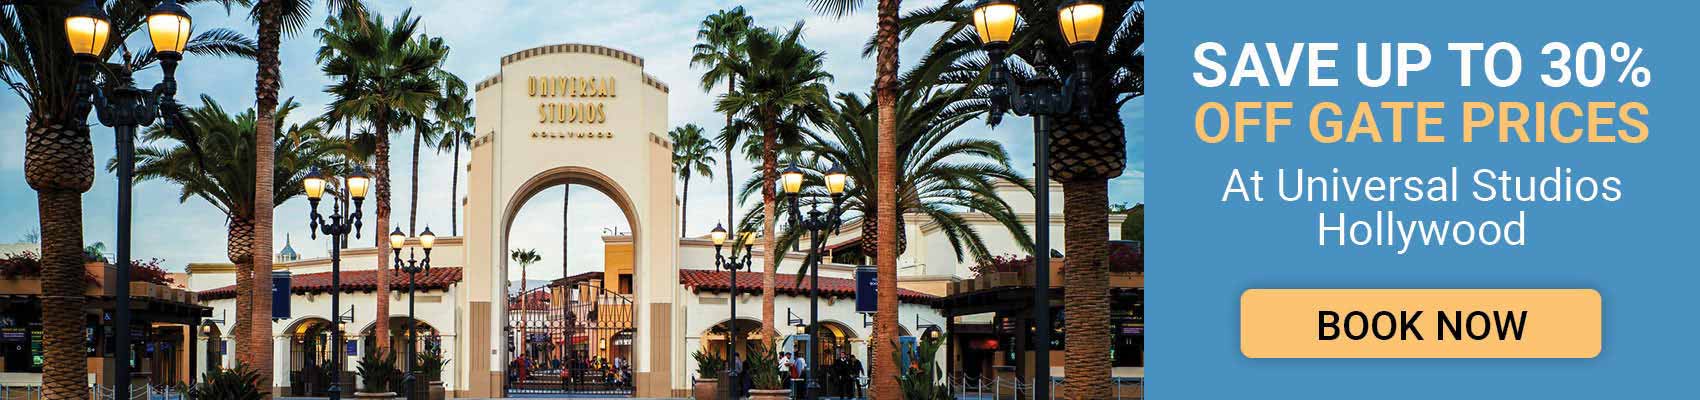 Save up to 30% off gate prices at Universal Studios Hollywood with AAA.